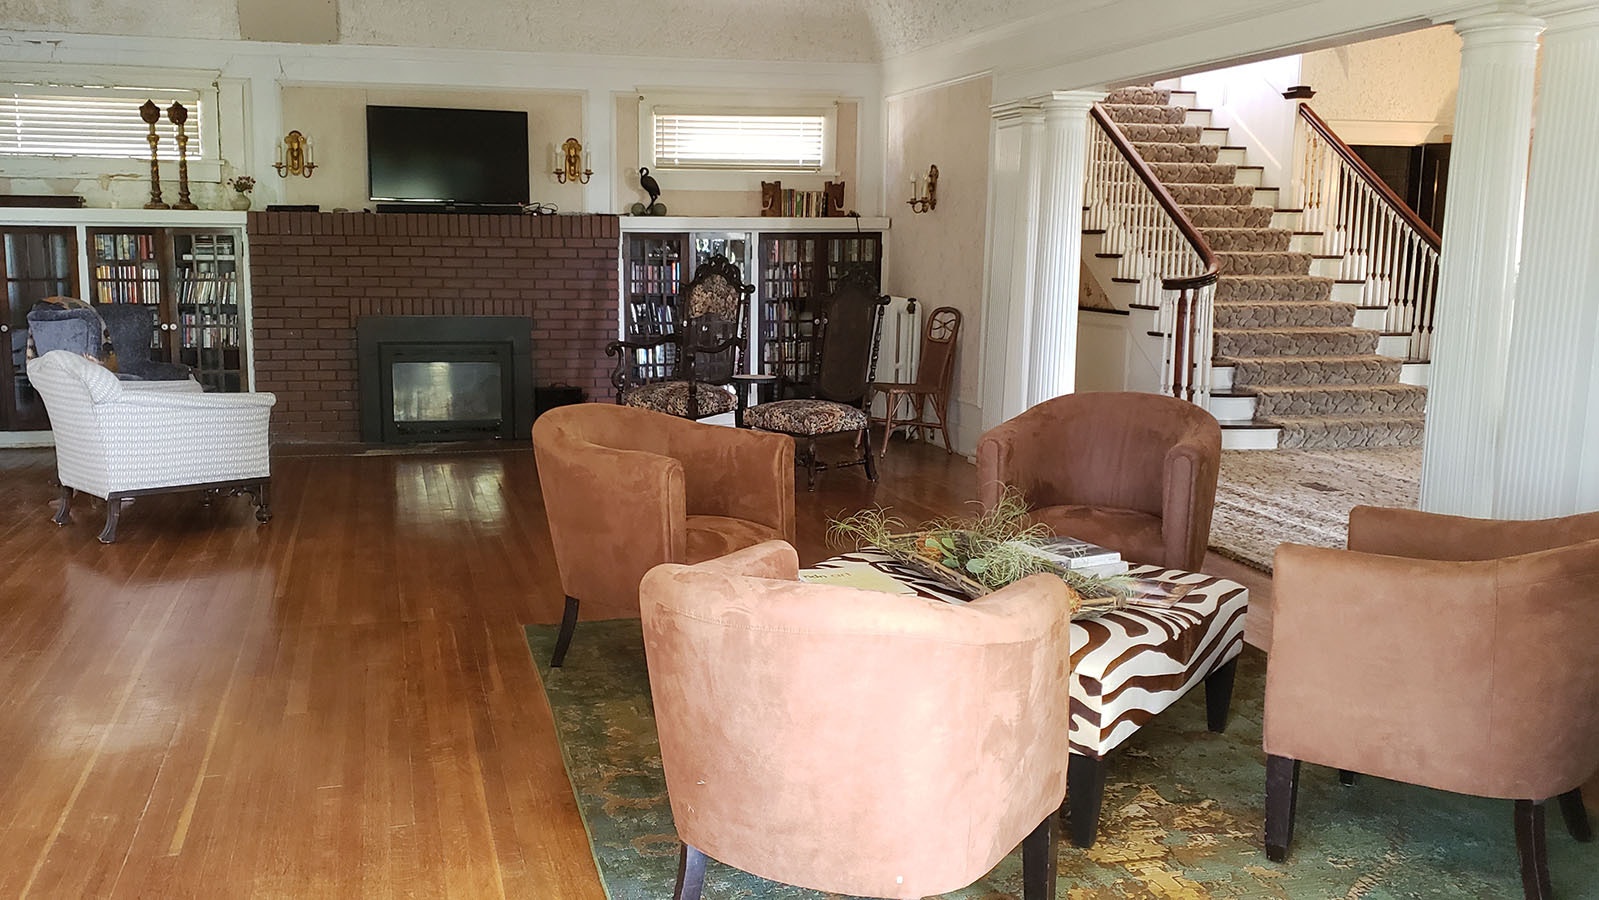 The spacious living room at the Arapaho Ranch.